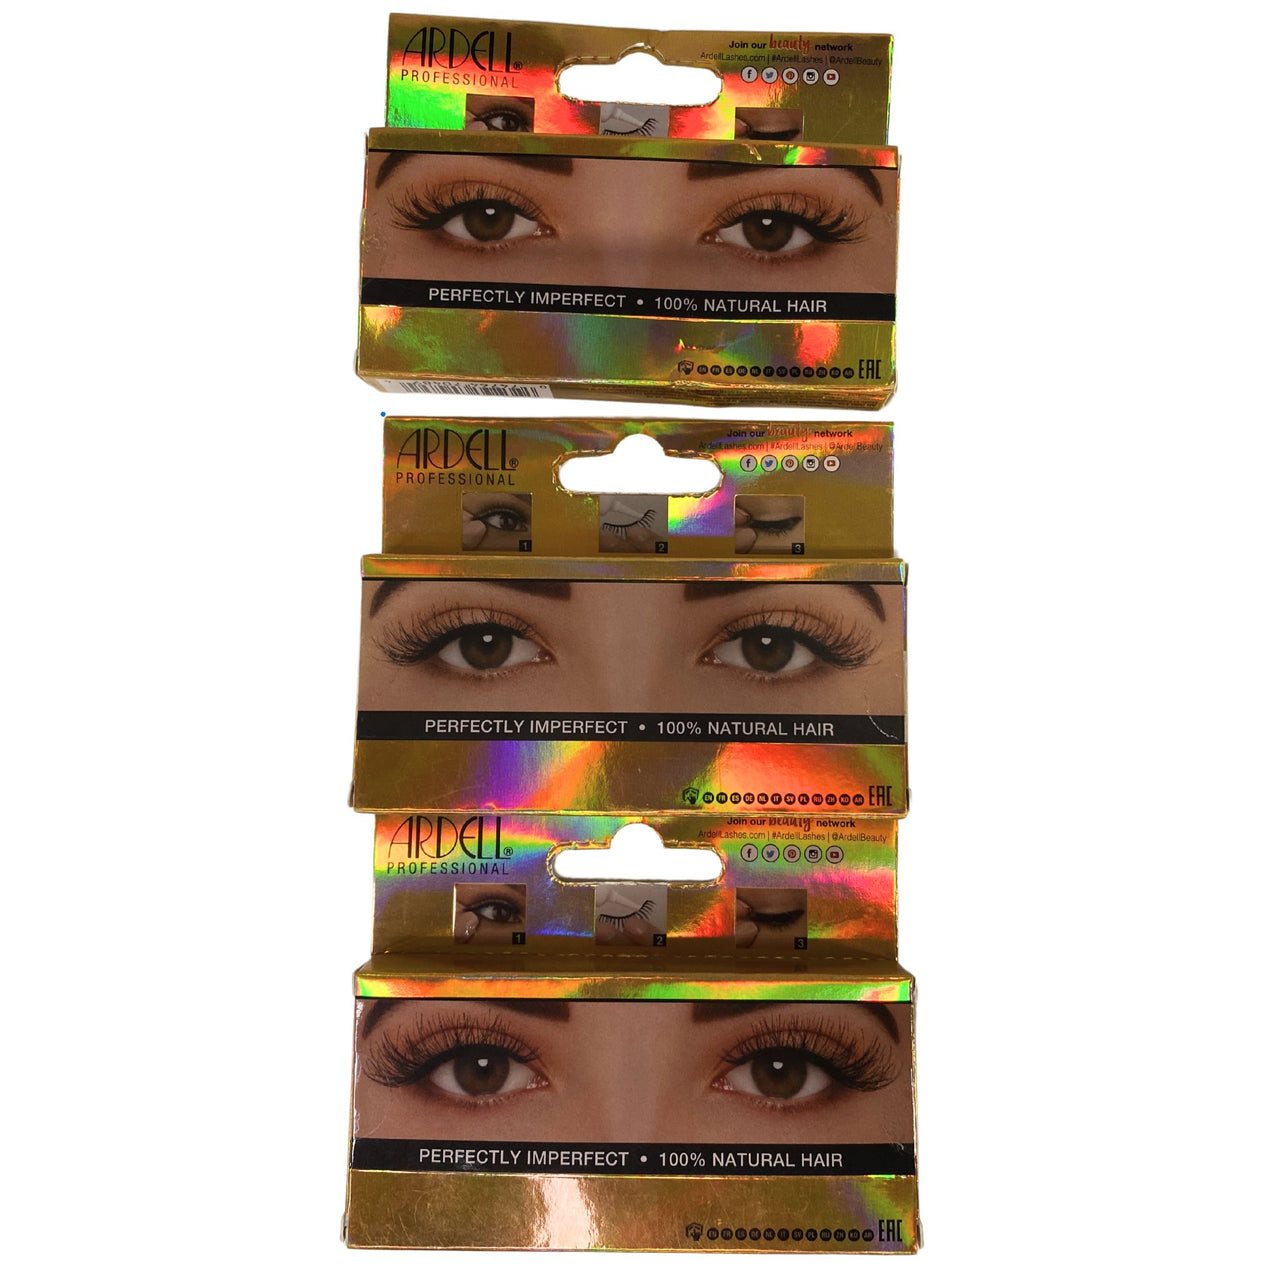 Texture Eyes Ardell Mix Assorted Lash Styles